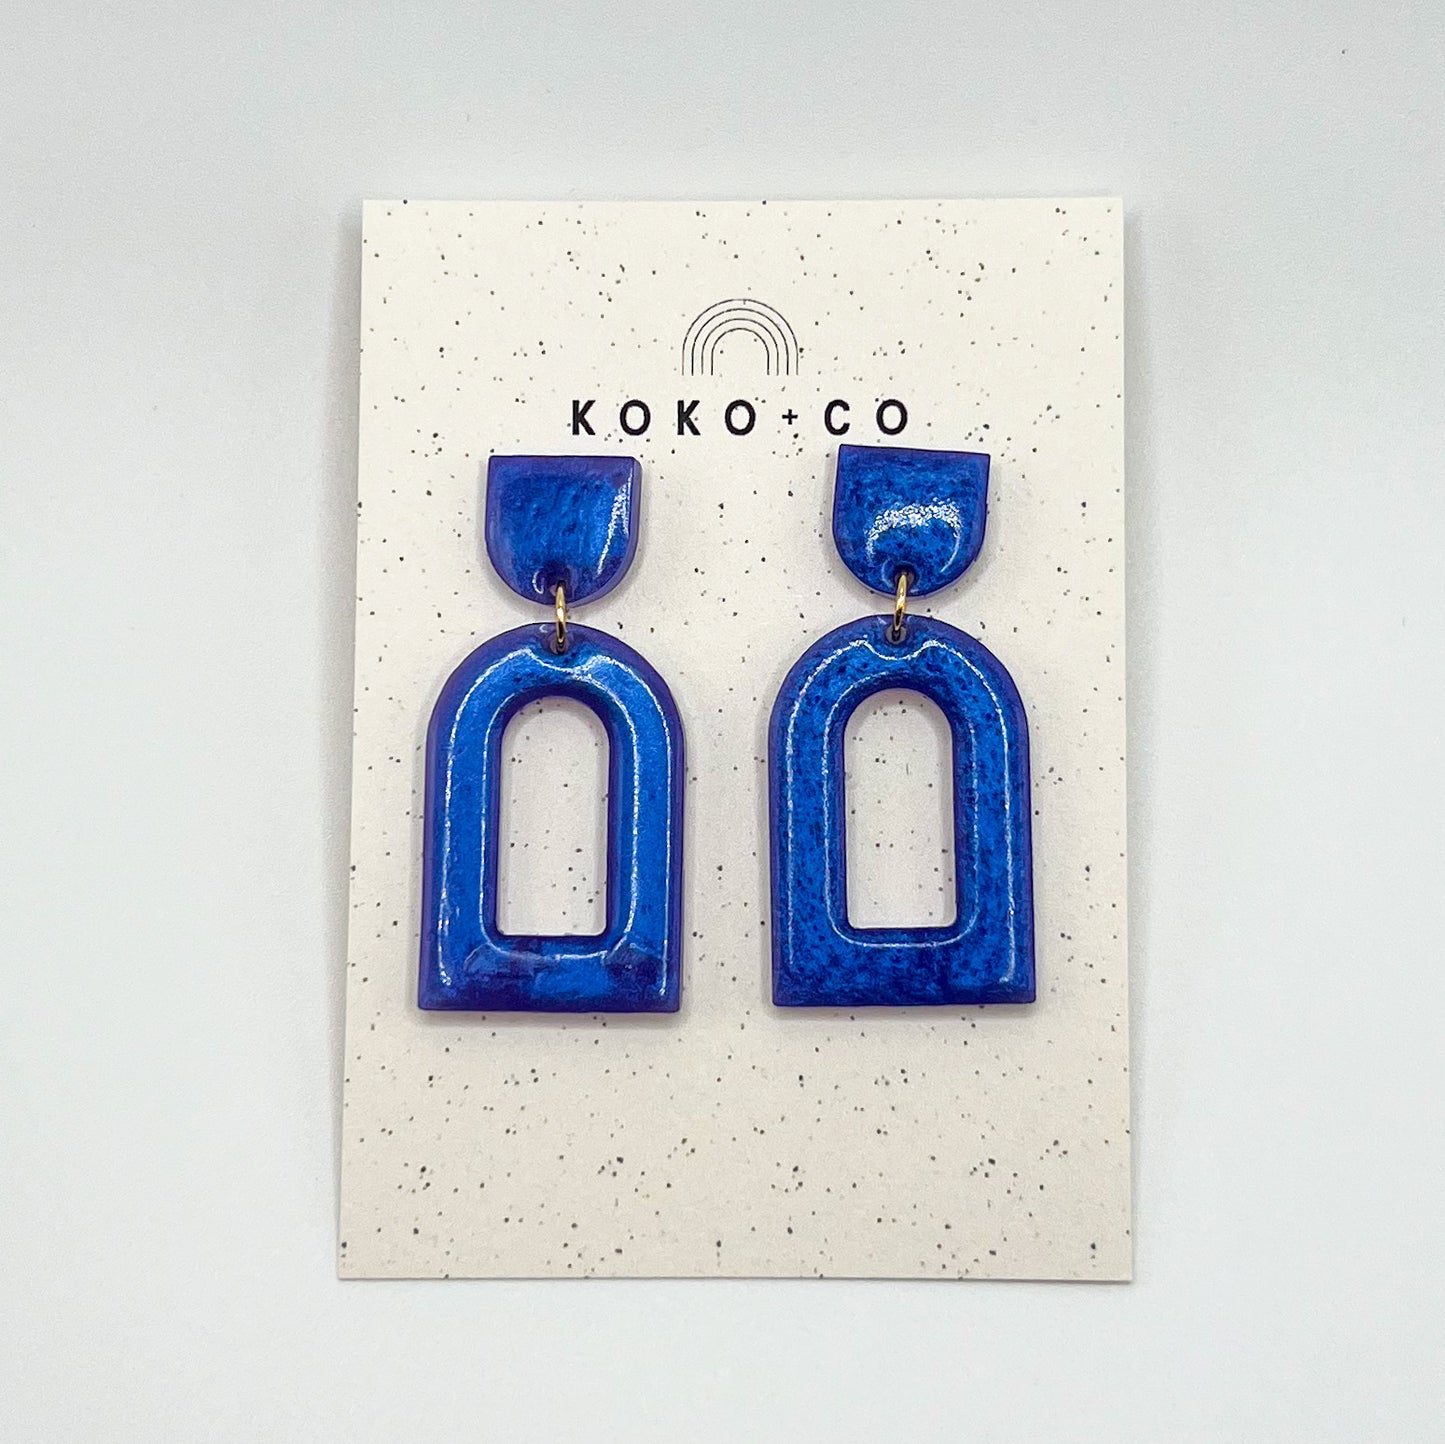 Arched Earrings in Indigo Blue